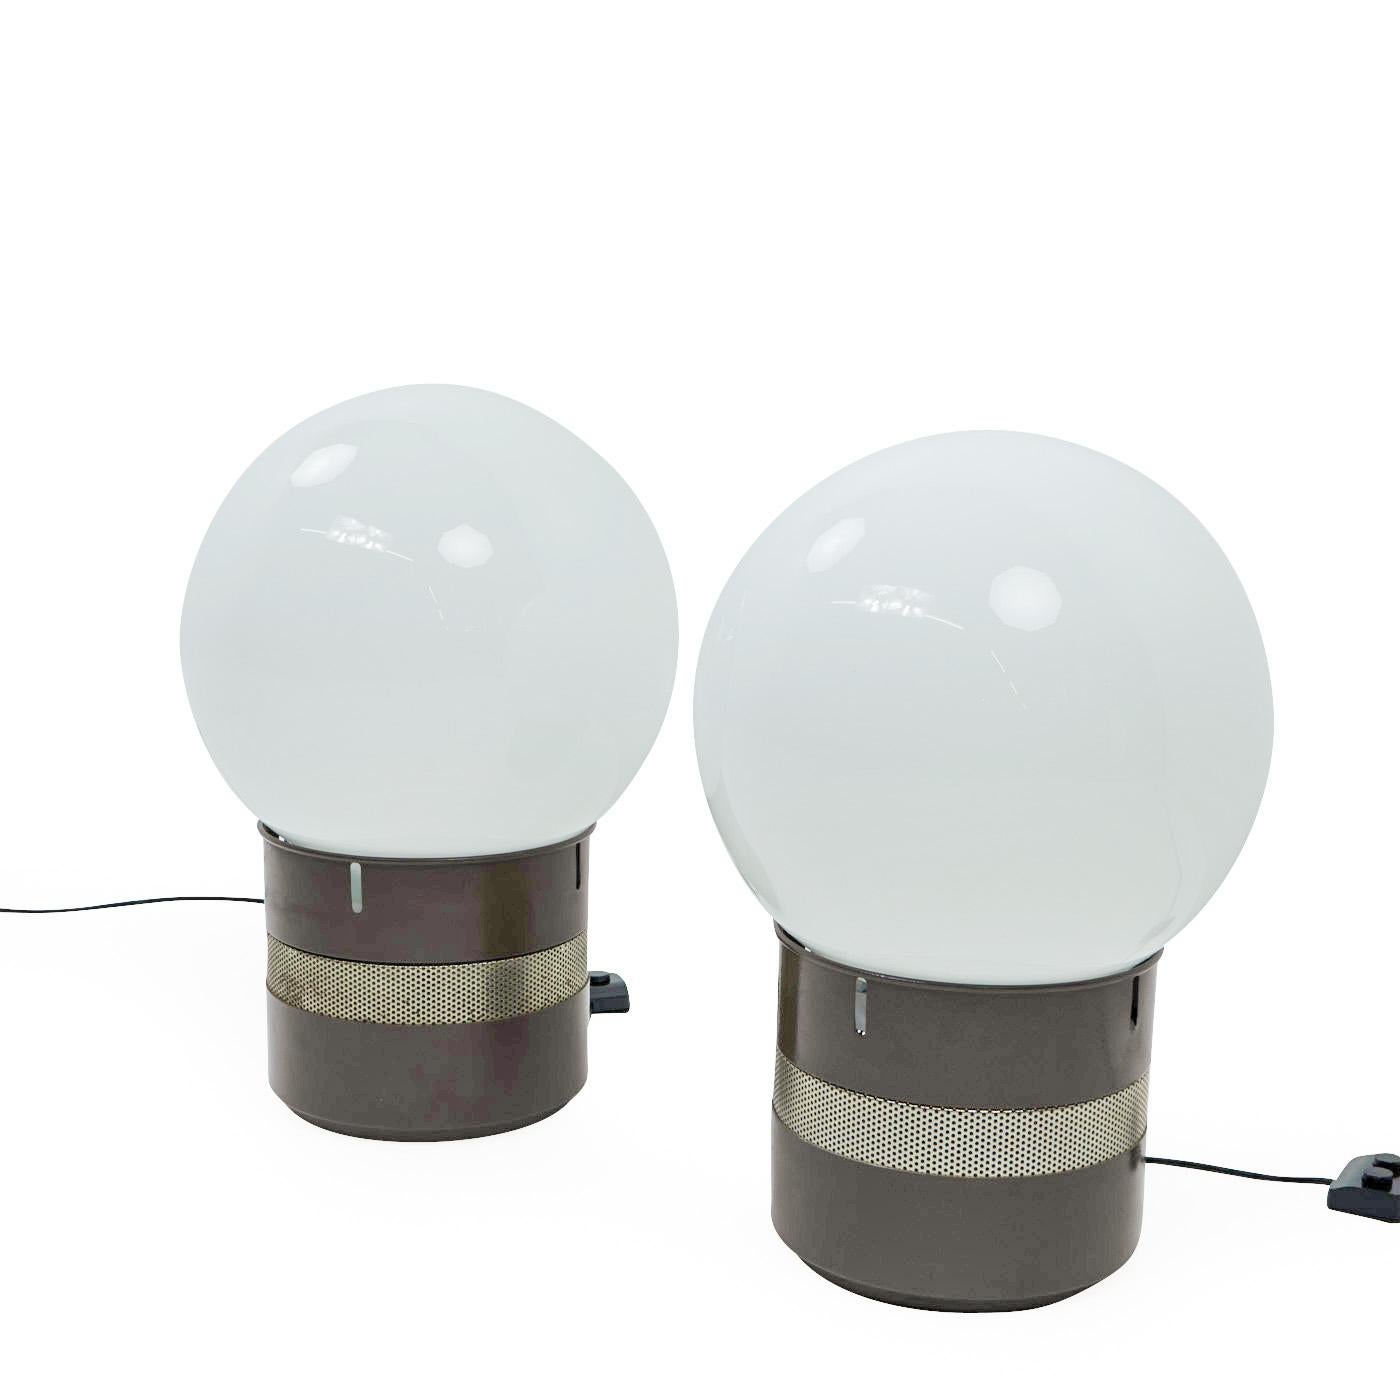 Mid-Century Modern Mezzo Oracolo lamps by Gae Aulenti for Artemide, 1960s For Sale